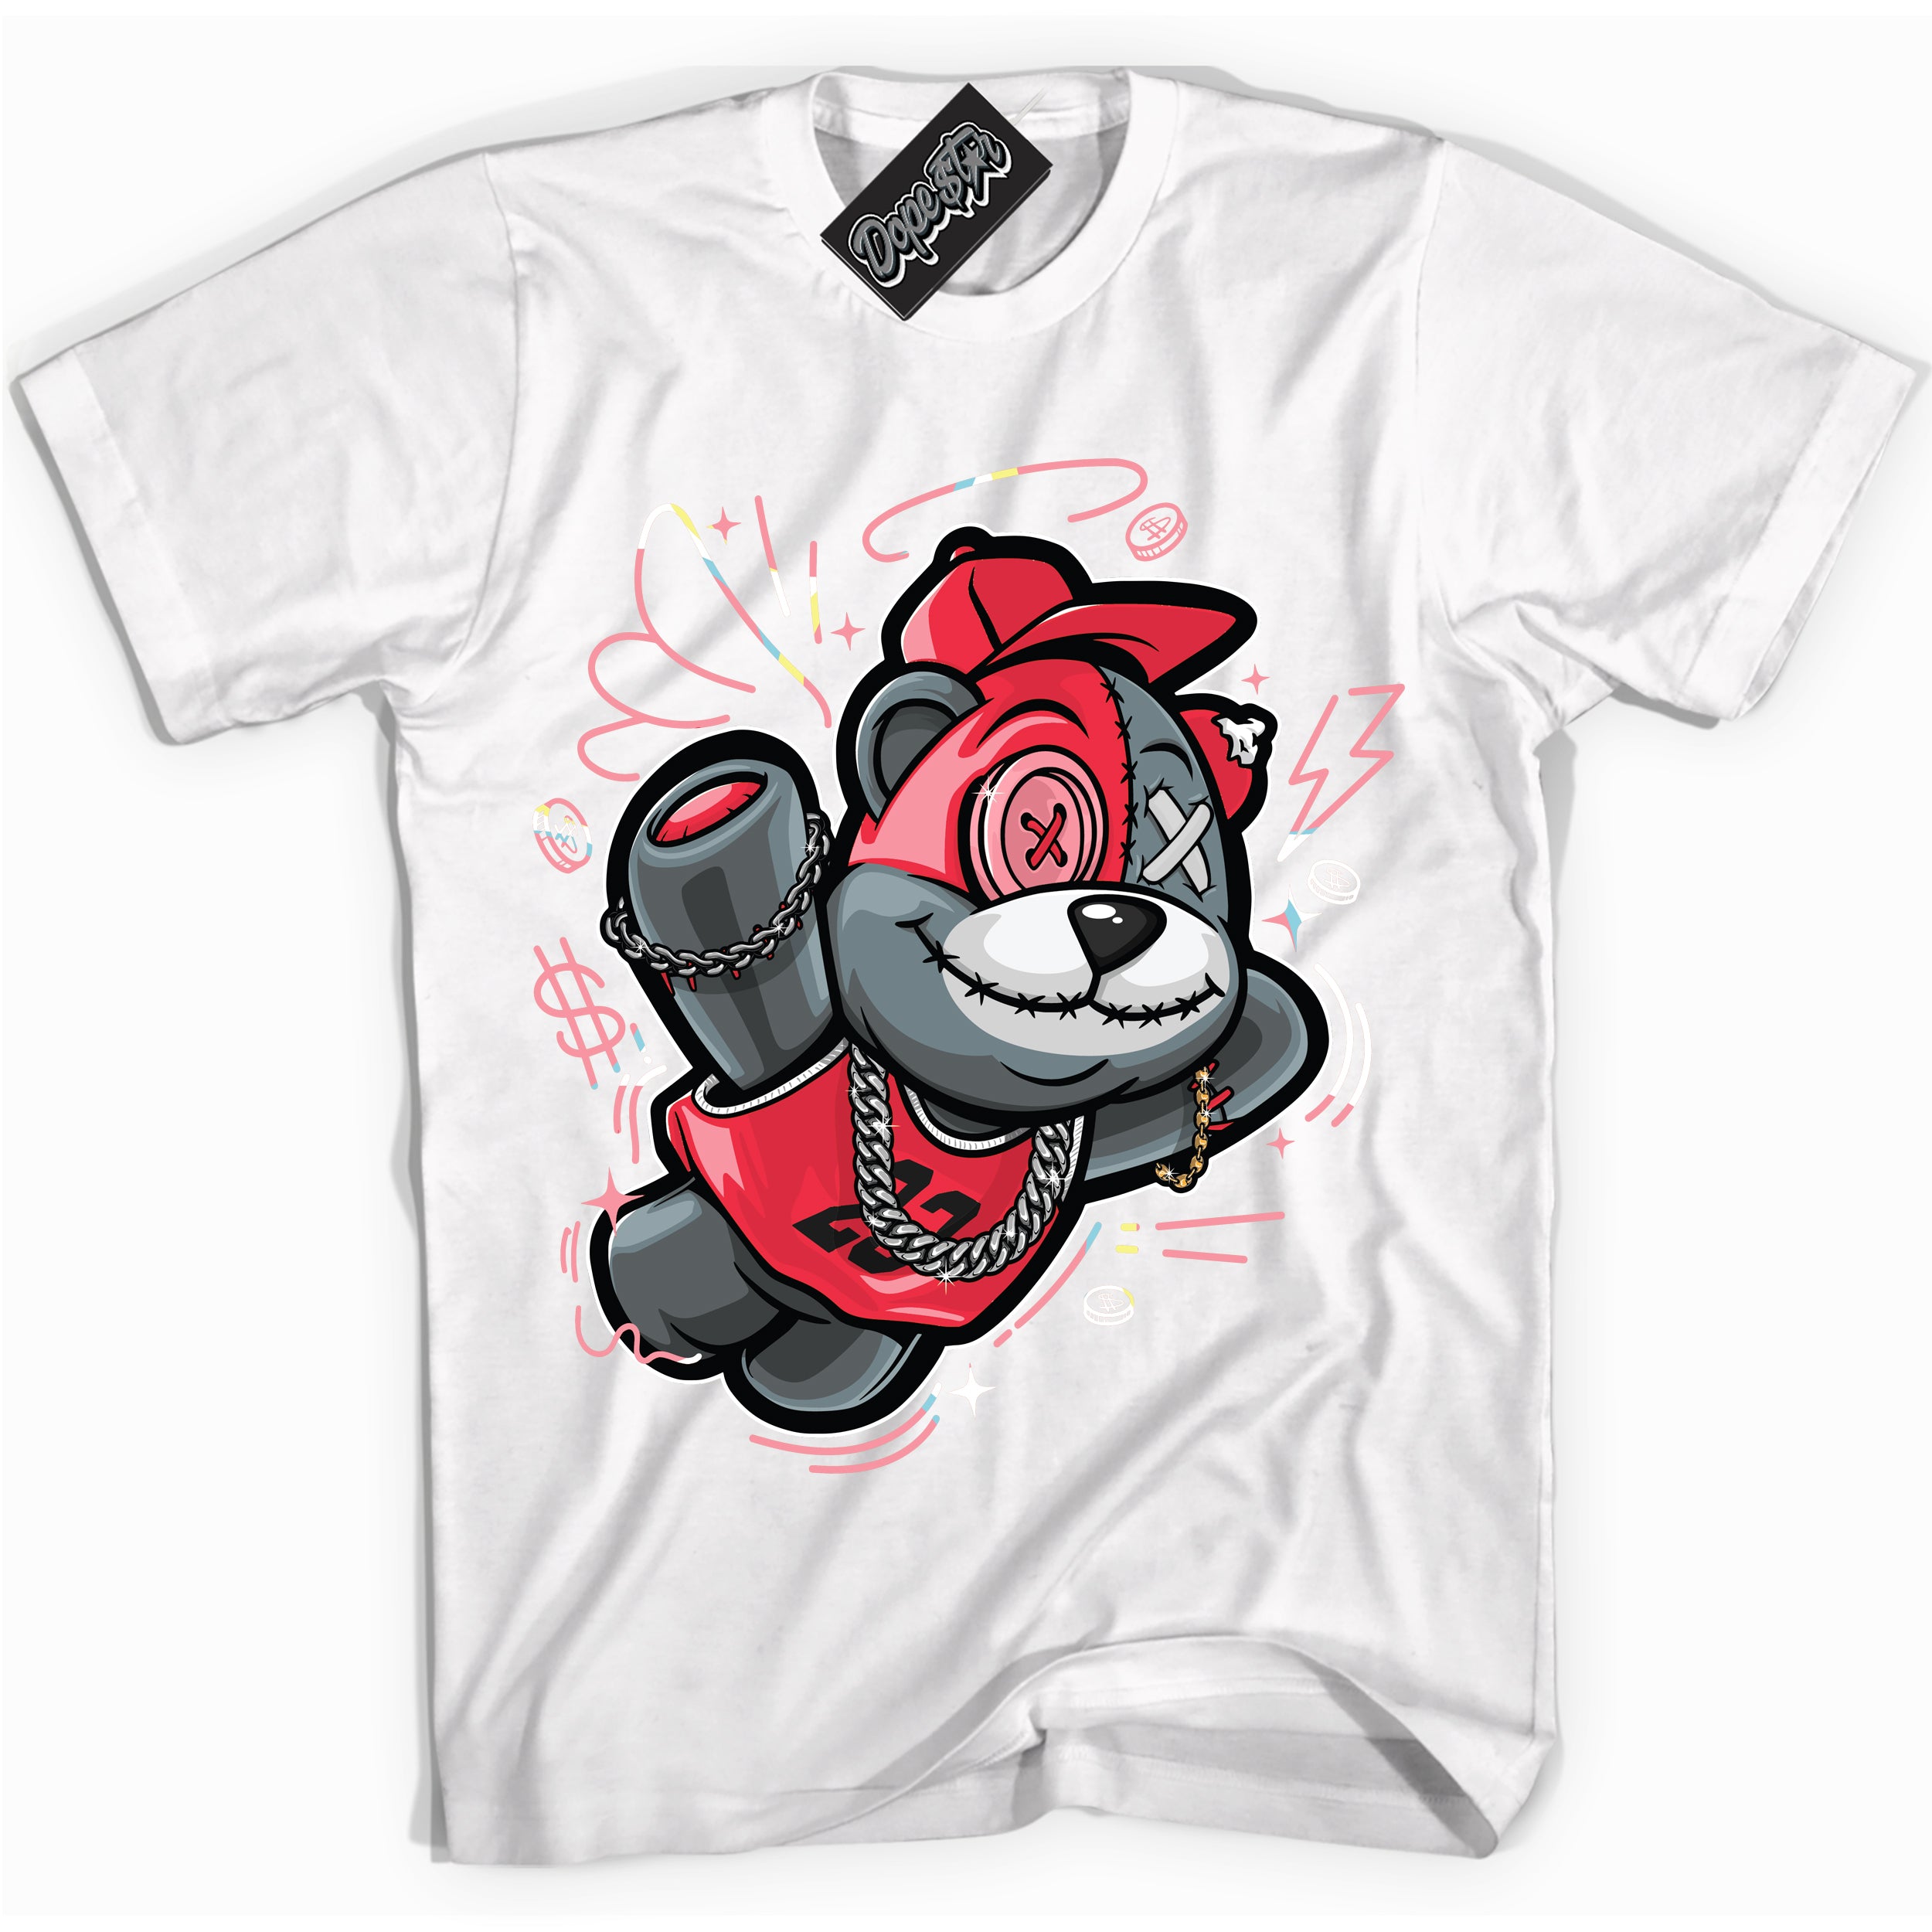 Cool White graphic tee with “ Slam Dunk Bear ” design, that perfectly matches Spider-Verse 1s sneakers 